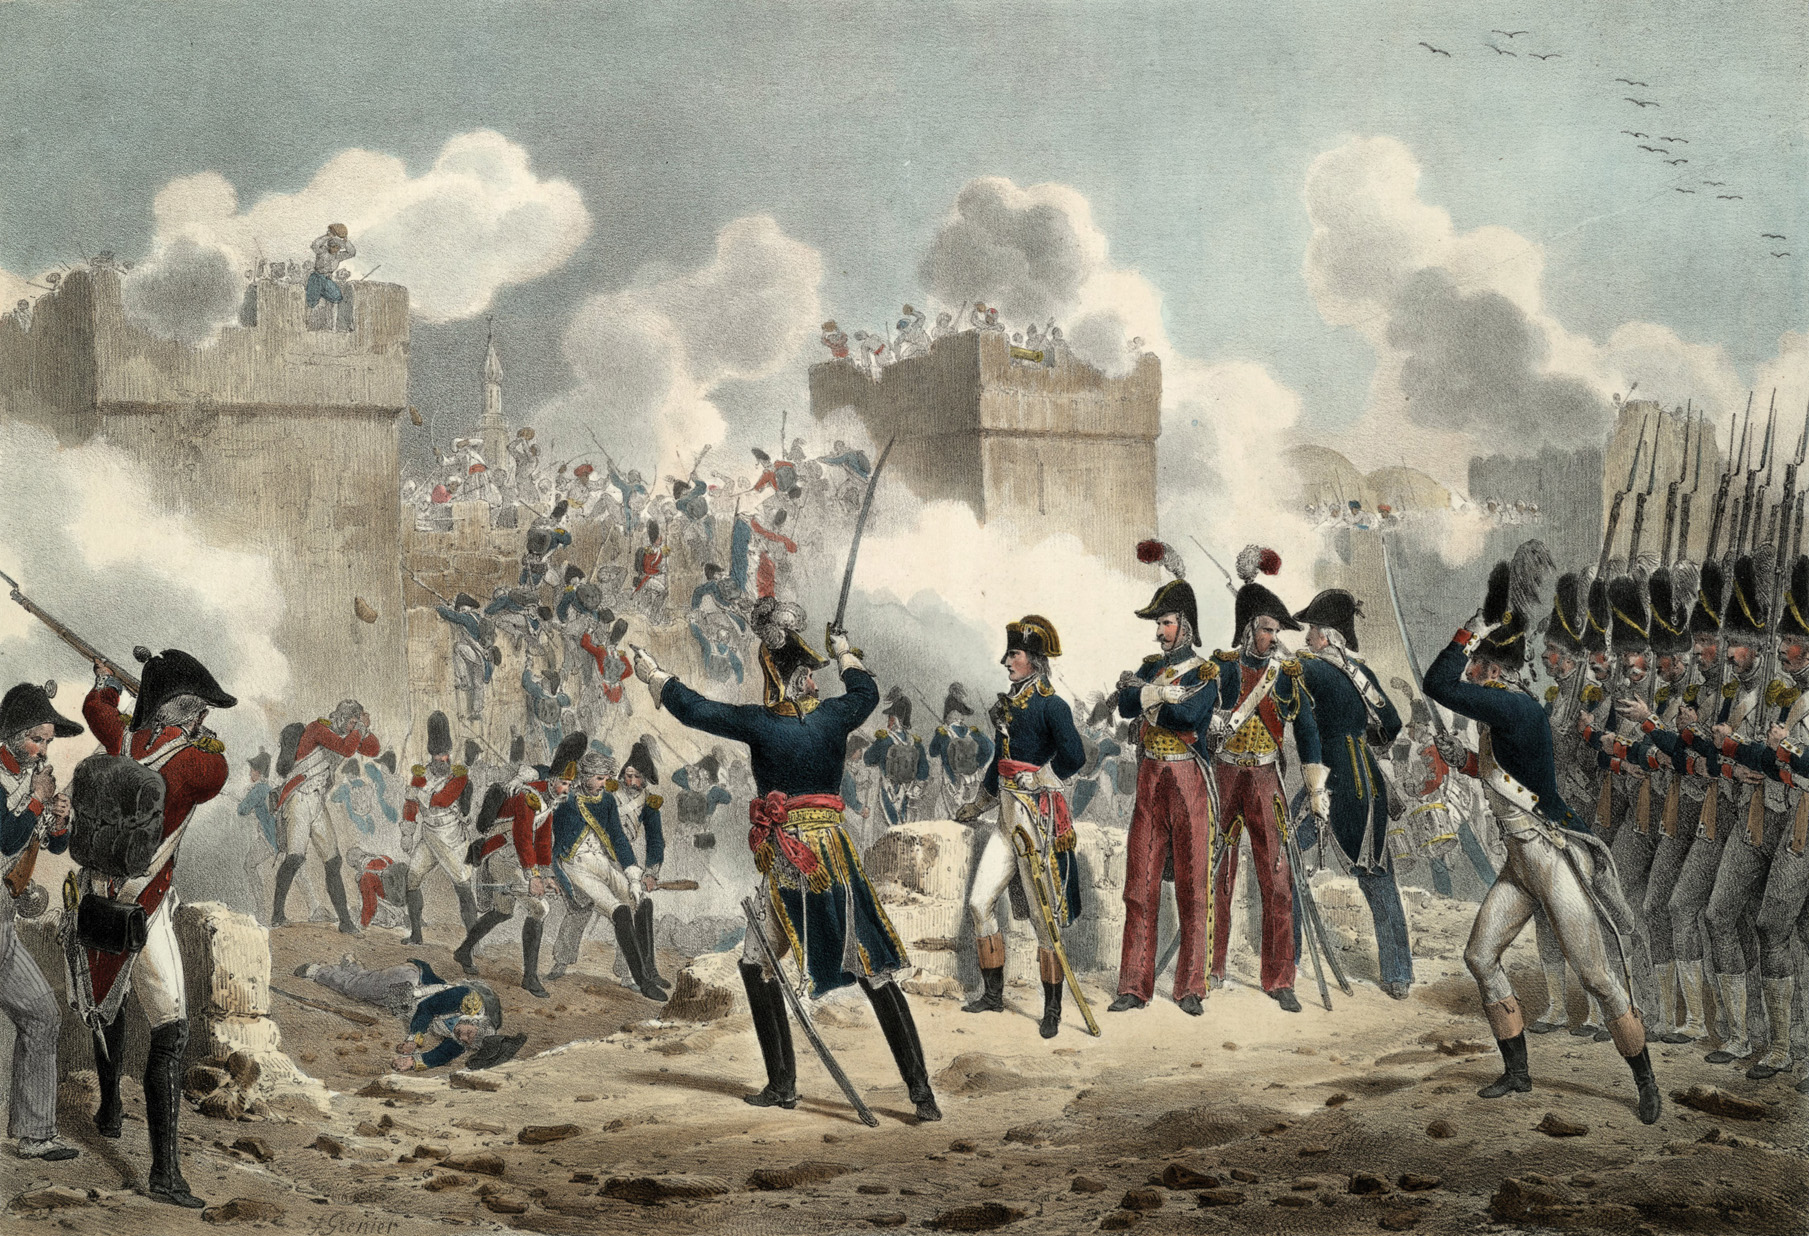 General Napoleon Bonaparte besieged the Ottoman stronghold at Acre in March 1799 but was thwarted when a British fleet arrived to support the Ottomans. 